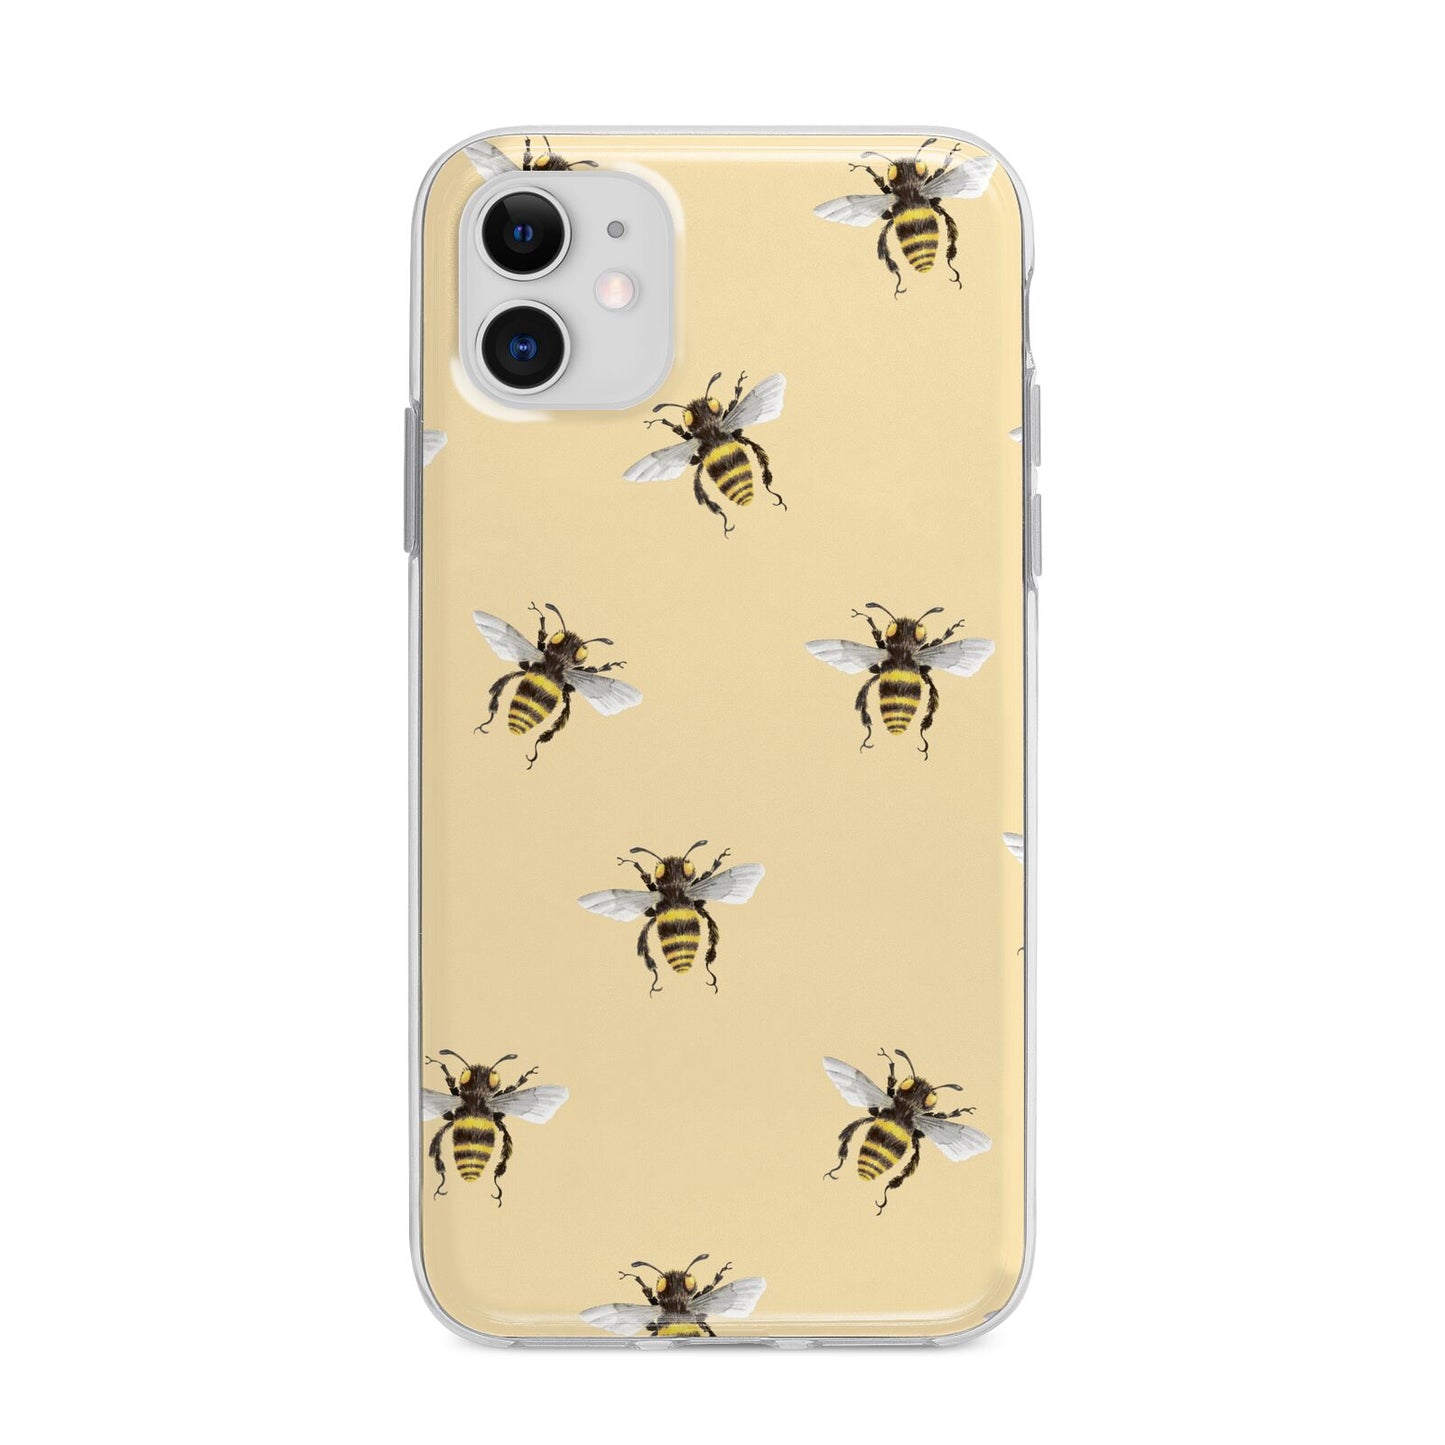 Bee Illustrations Apple iPhone 11 in White with Bumper Case